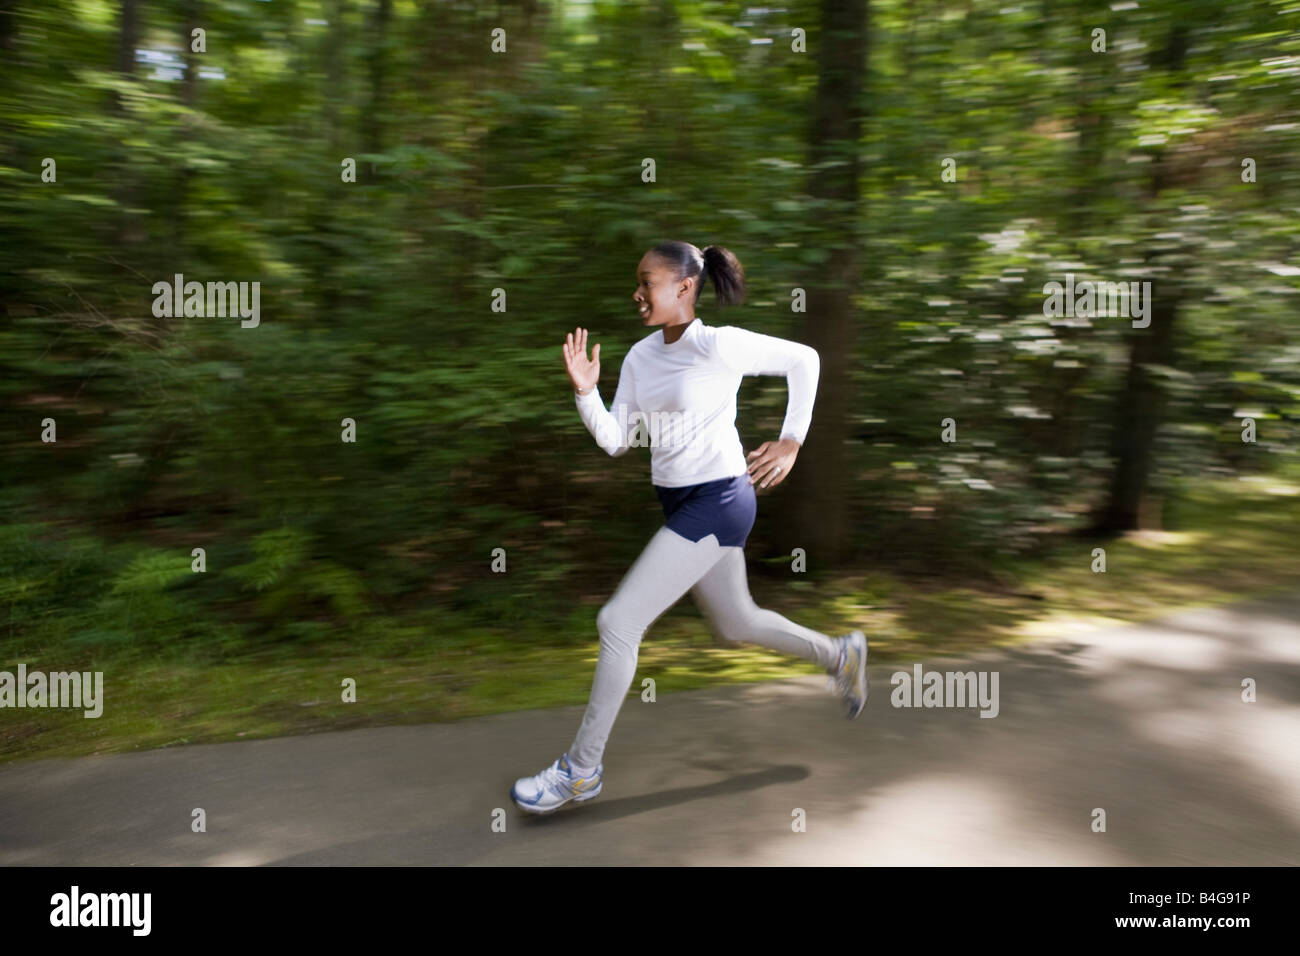 A woman jogging through a wooded park Stock Photo